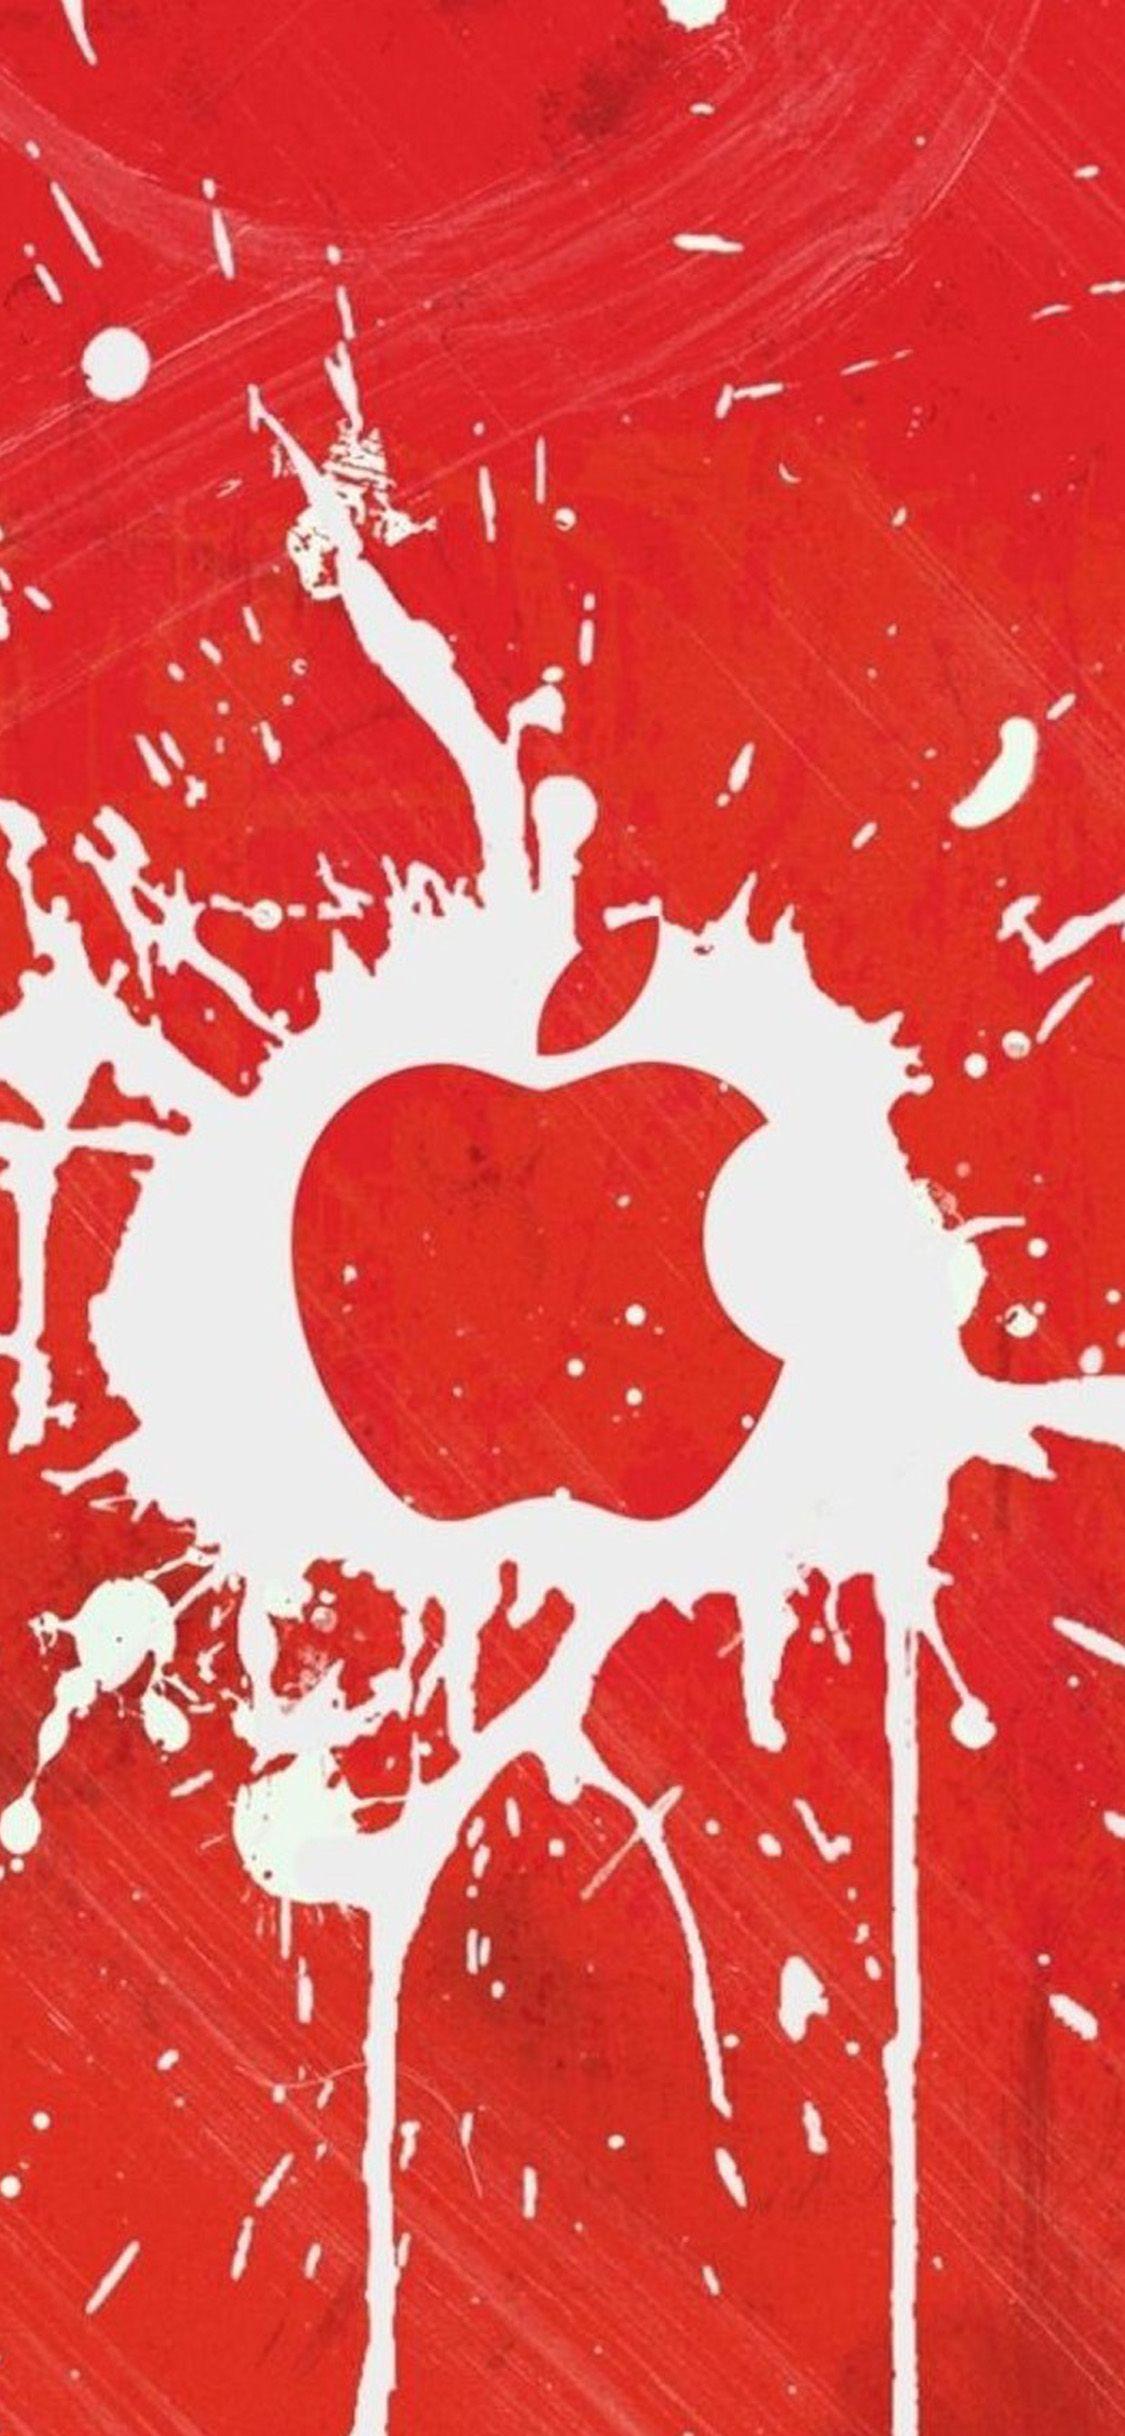 Smear Red Apple Iphone X Wallpaper IPhone X & X2 Wallpaper Download